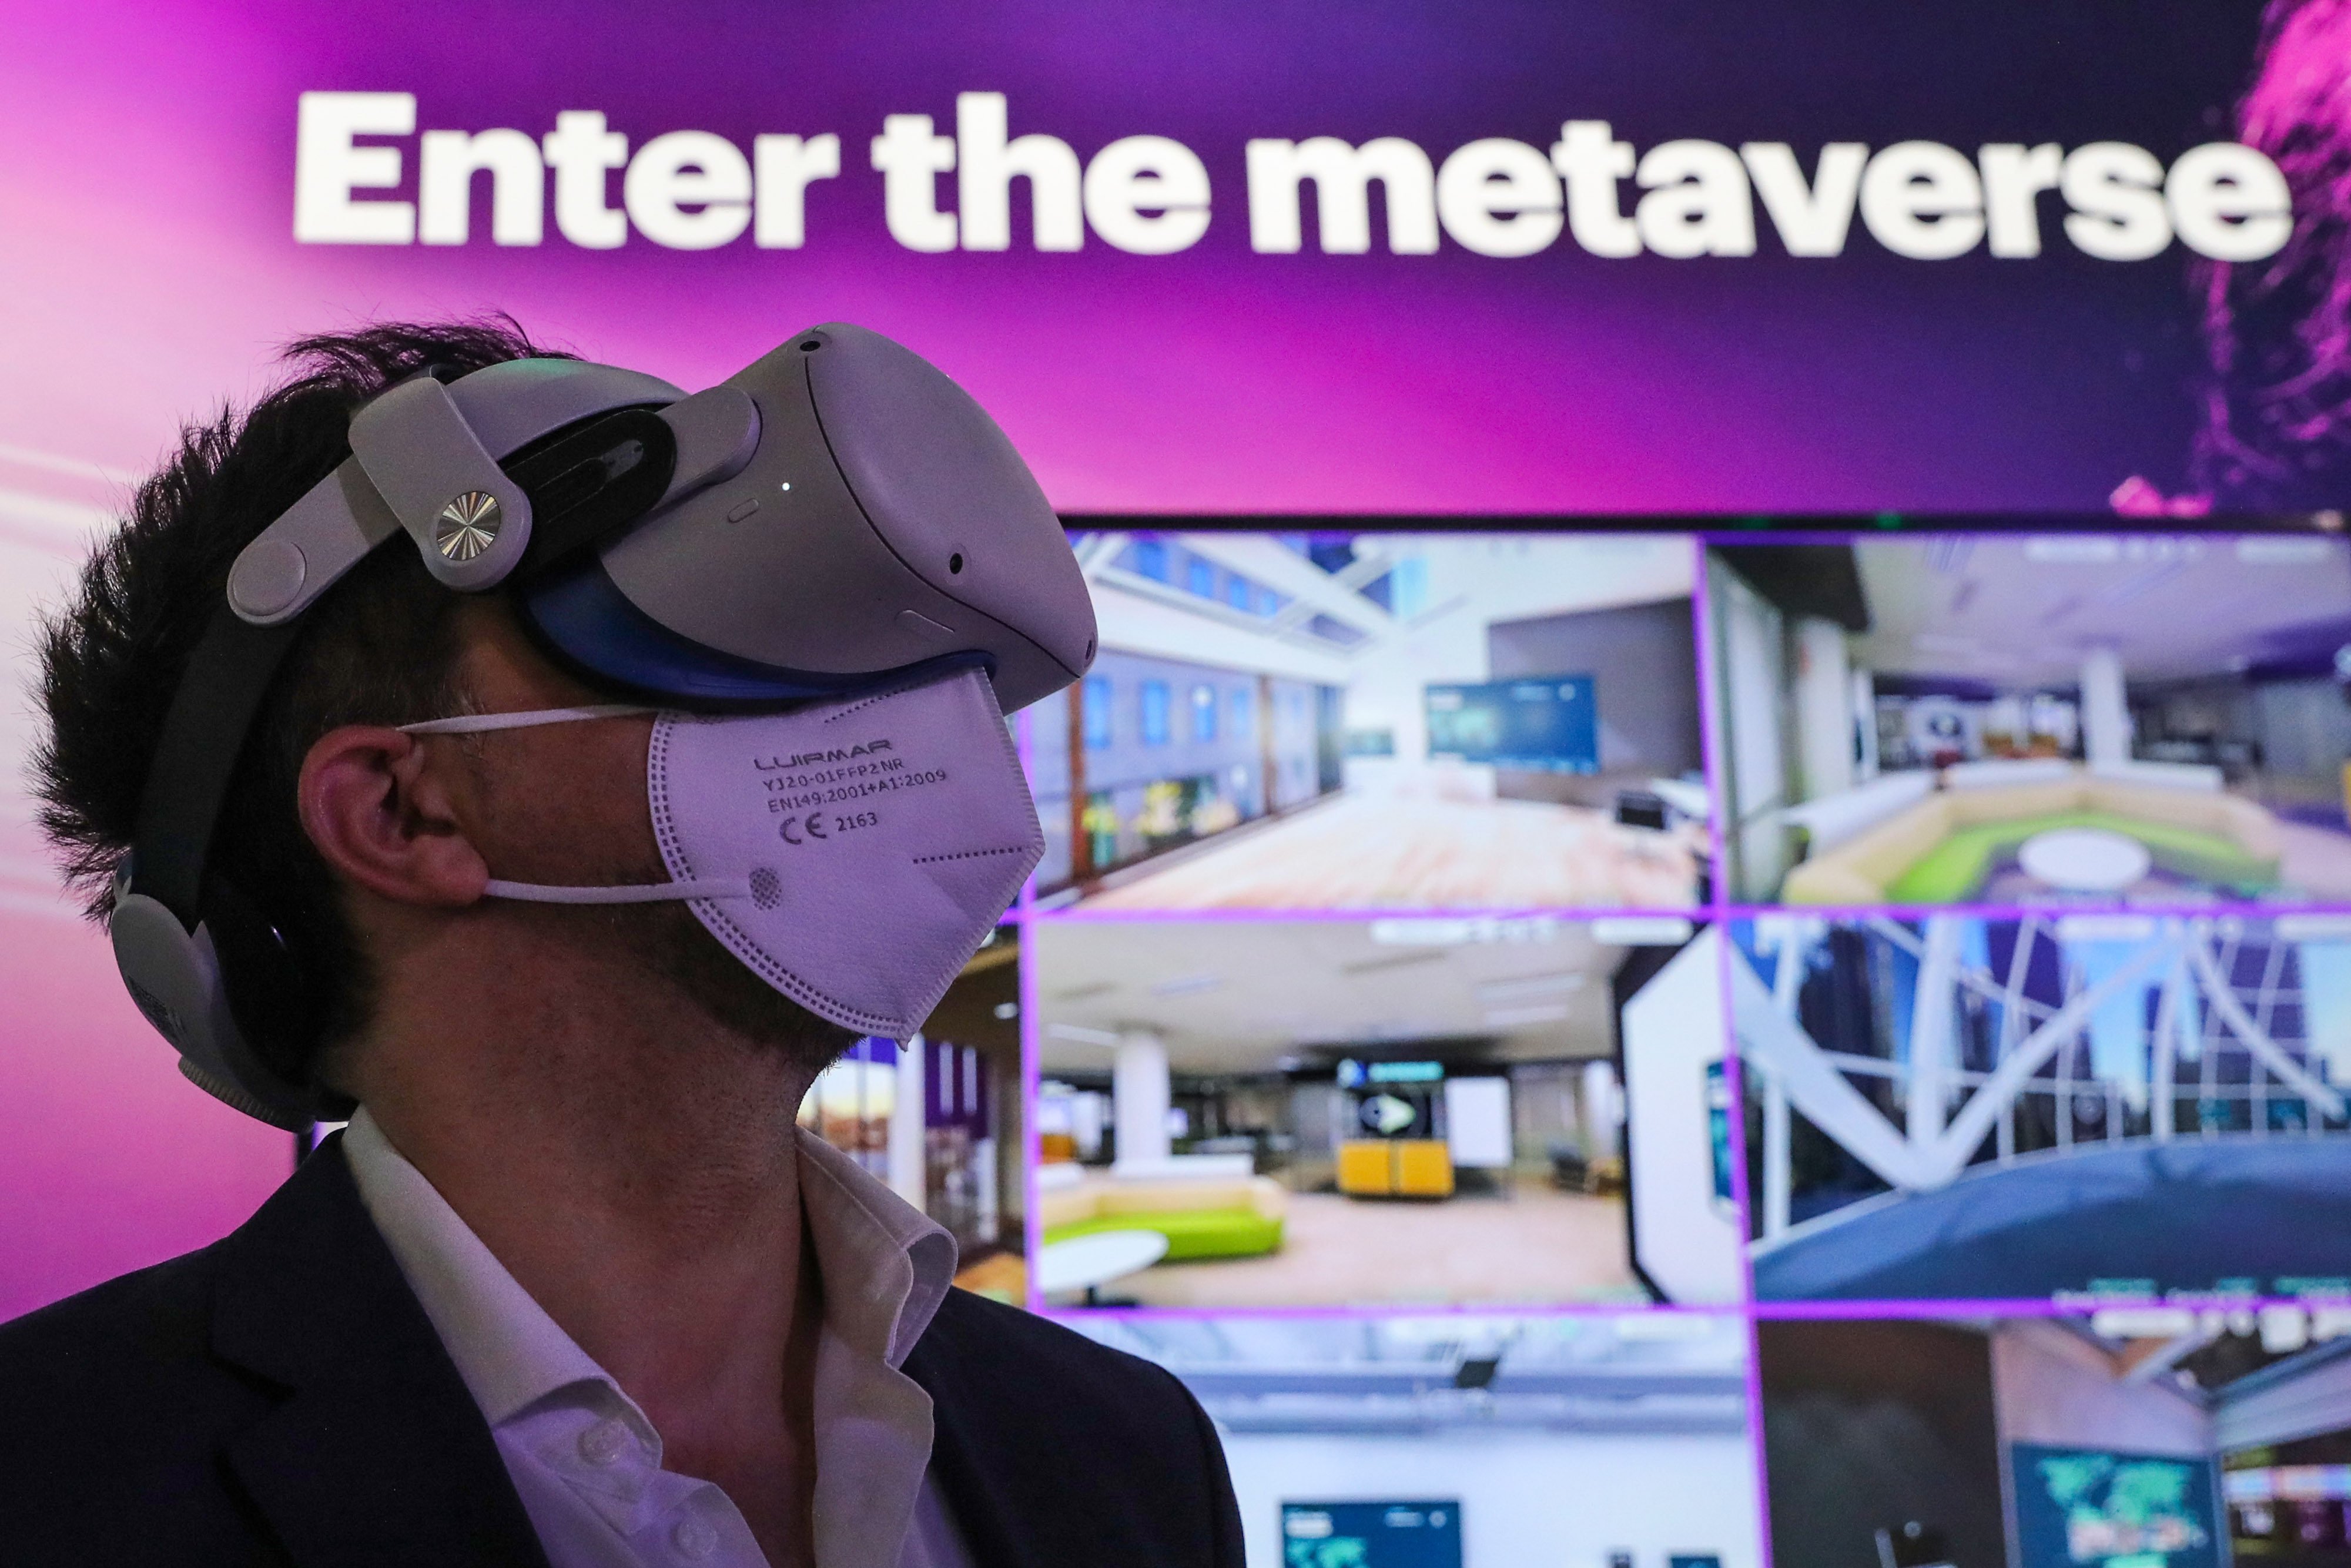 An attendee wears an Oculus virtual reality headset during a demonstration of the metaverse at the Accenture stand on day two of MWC Barcelona on March 1, 2022. Photo: Bloomberg